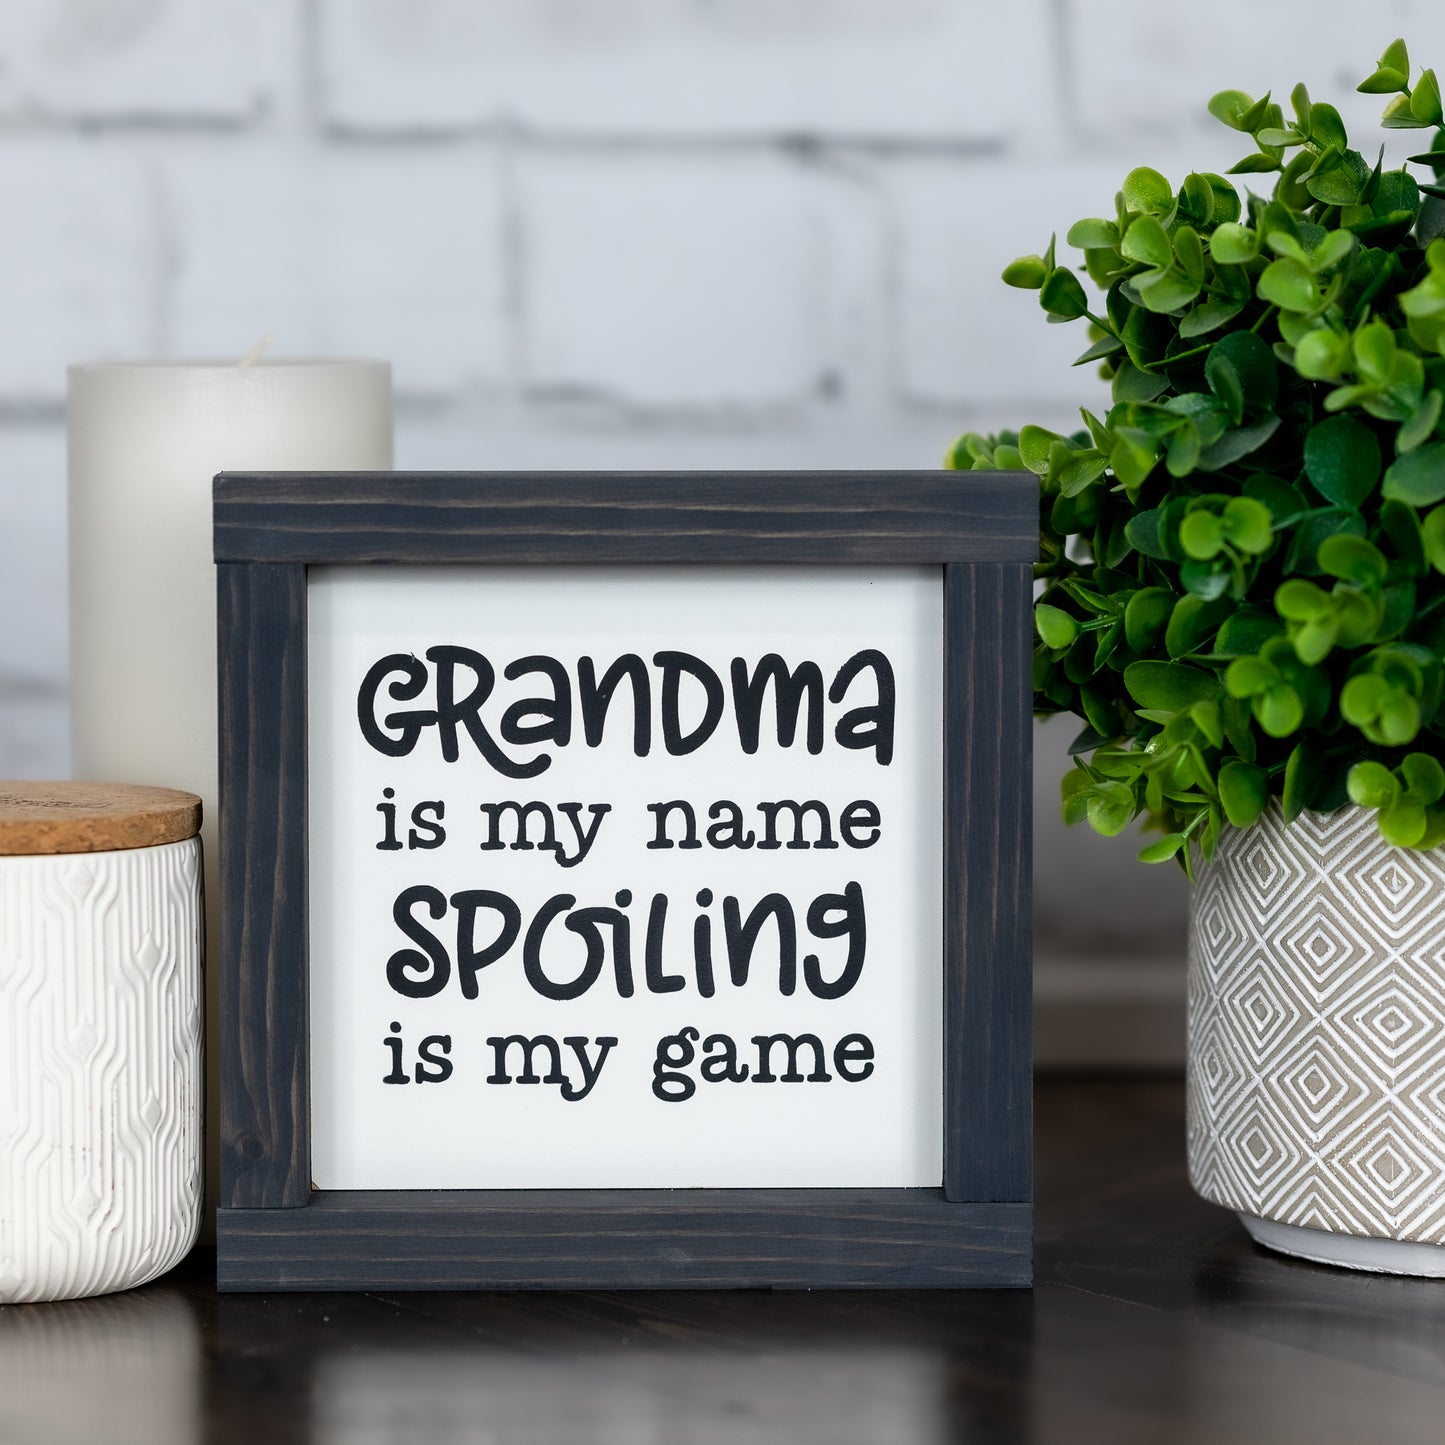 grandma is my name and spoiling is my game ~ wood sign